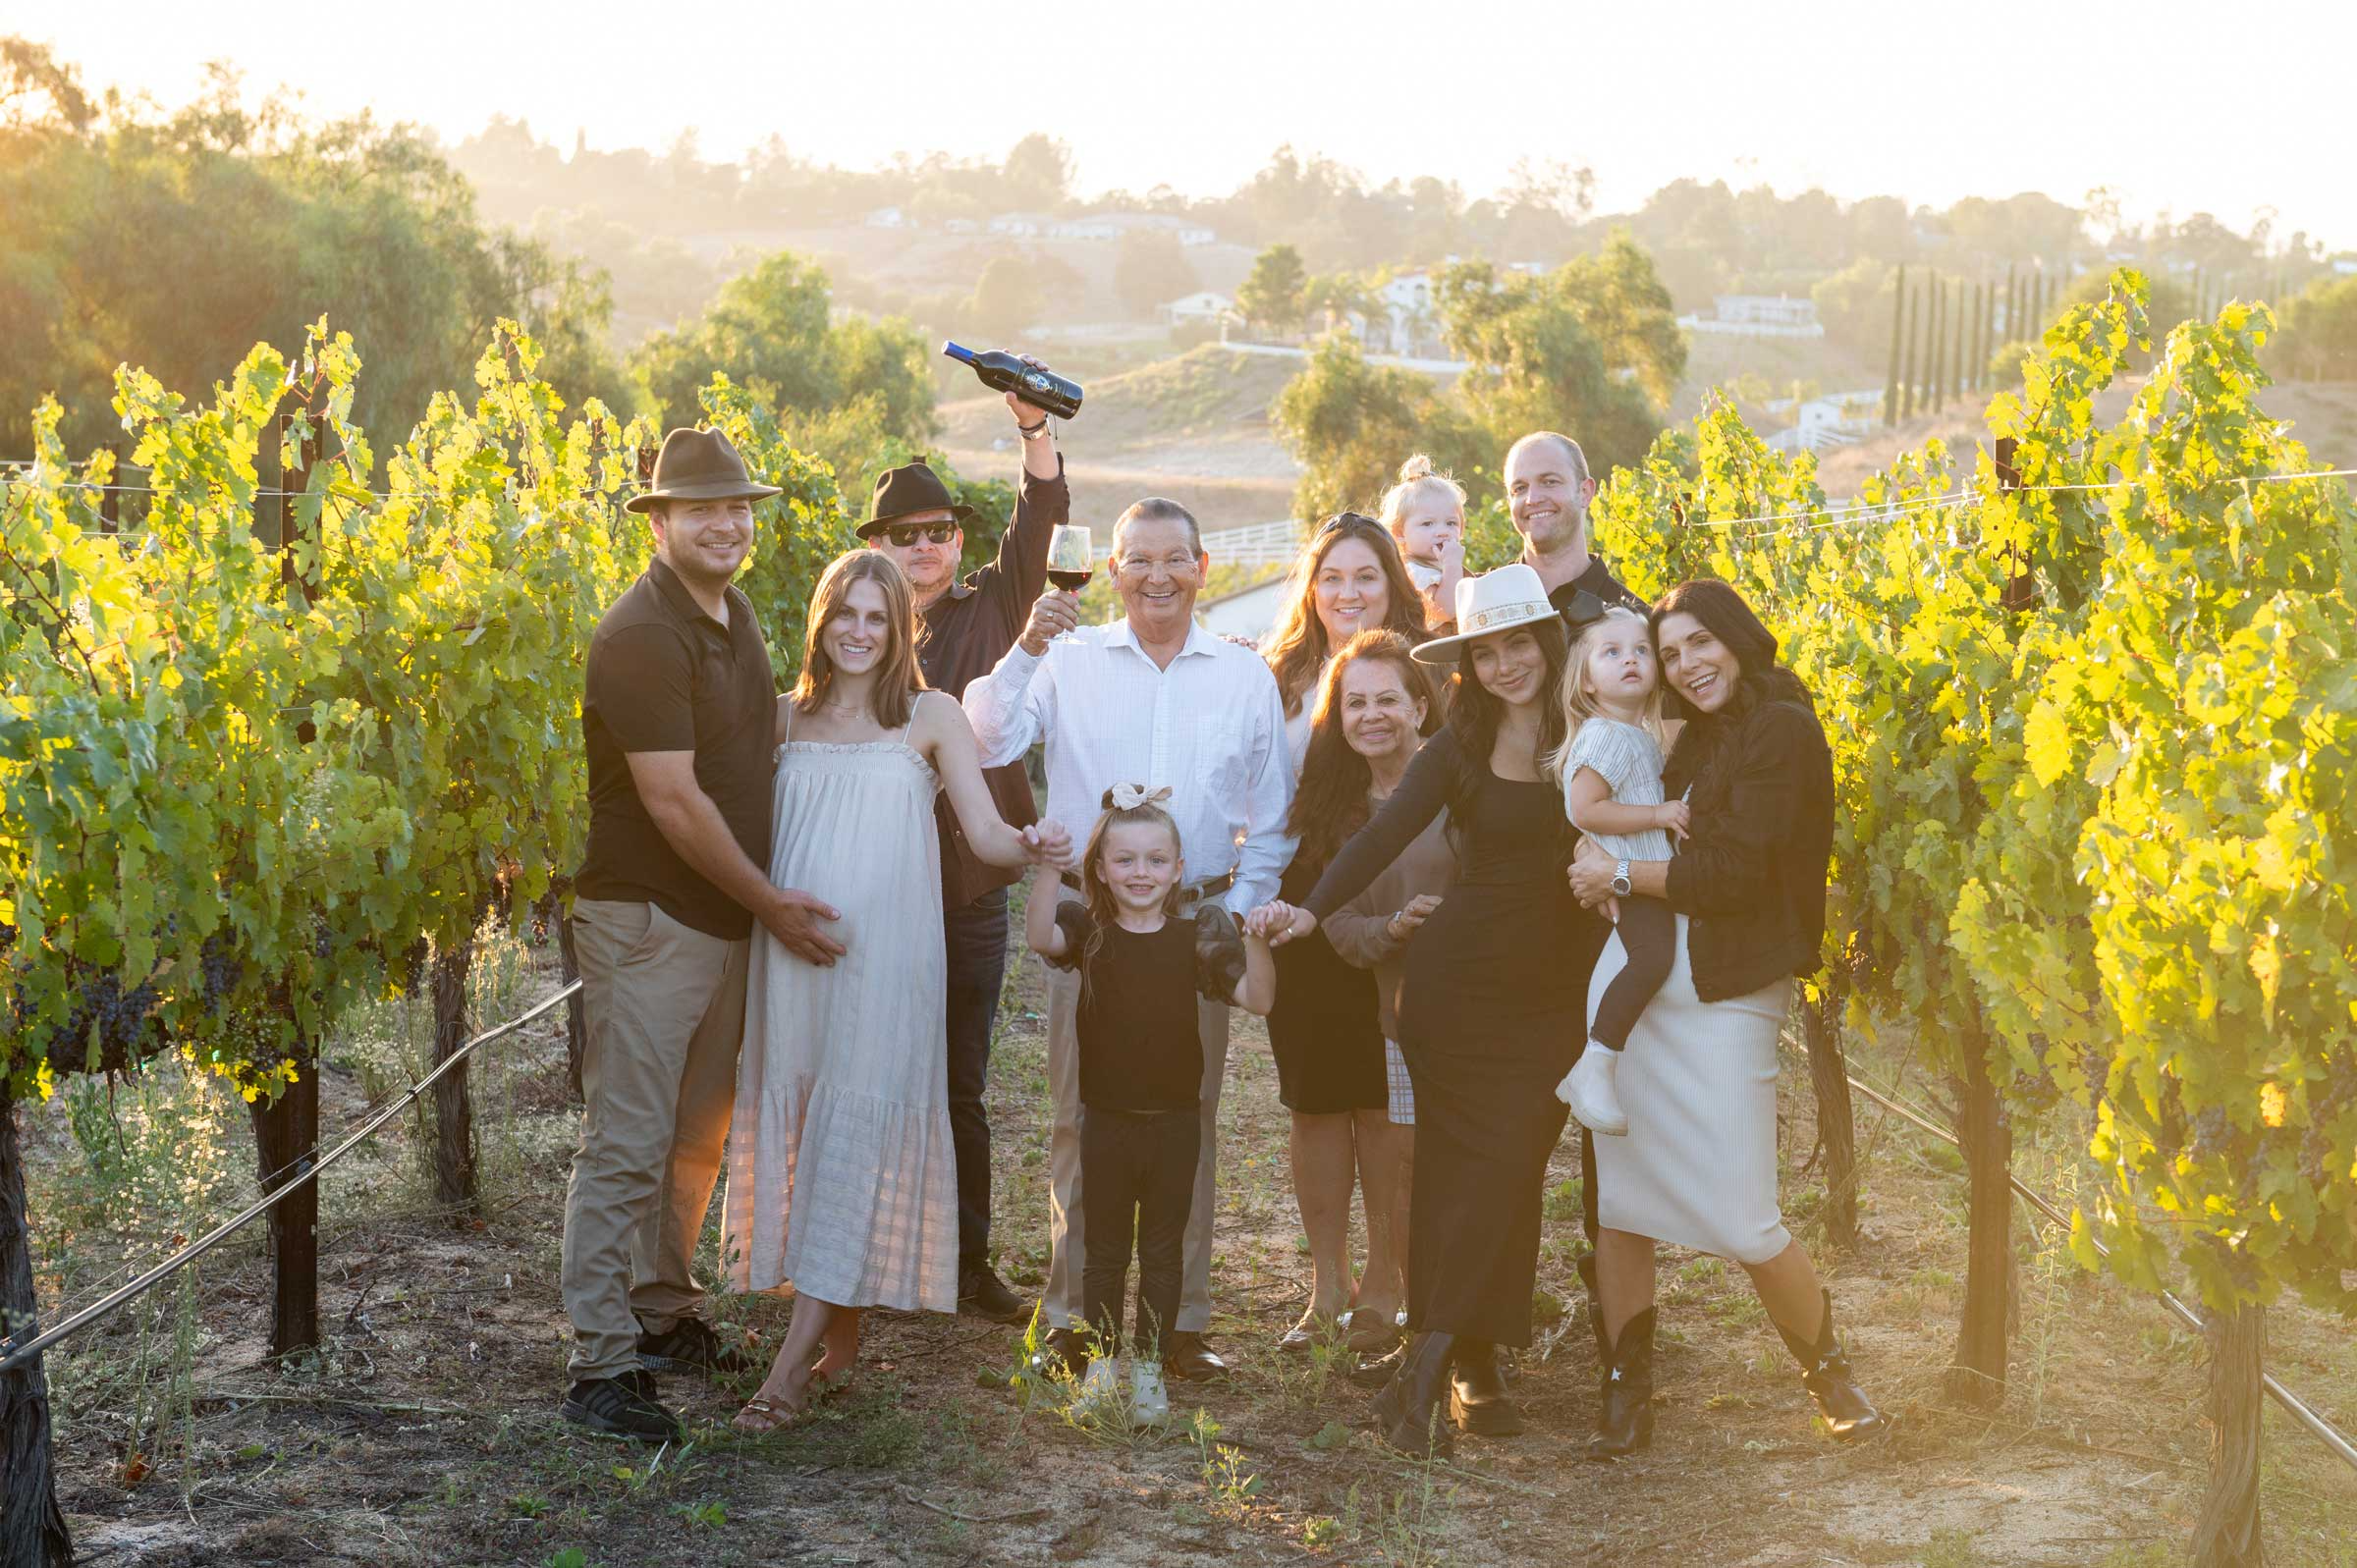 Navarro family standing in vineyards posing for a picture, Rafael ii and iii holding wine bottle and glass.